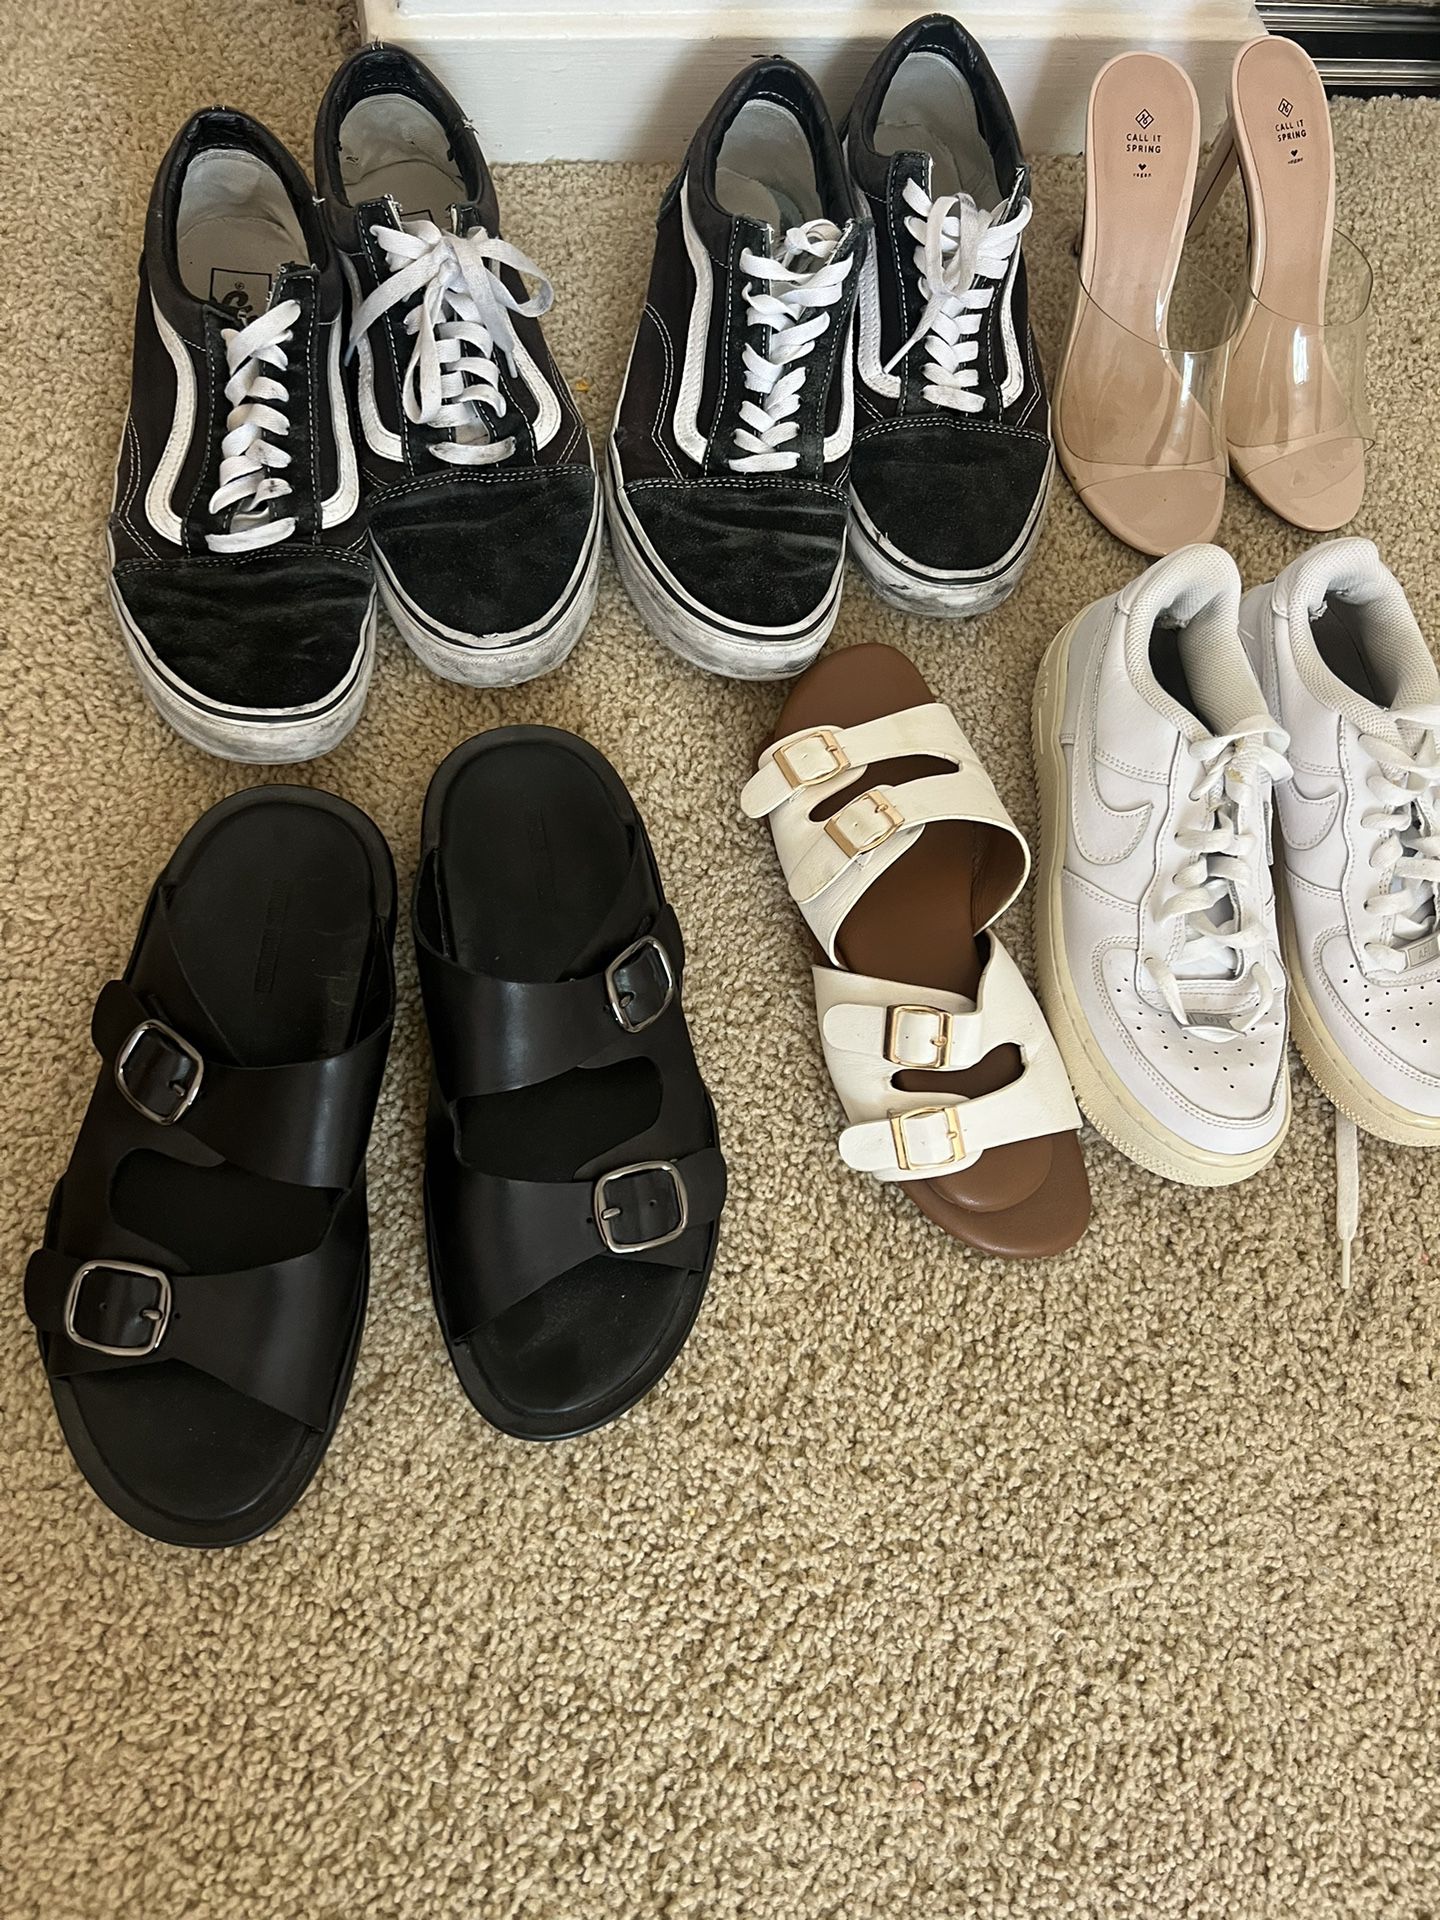 Shoes Slippers Heels All For $10